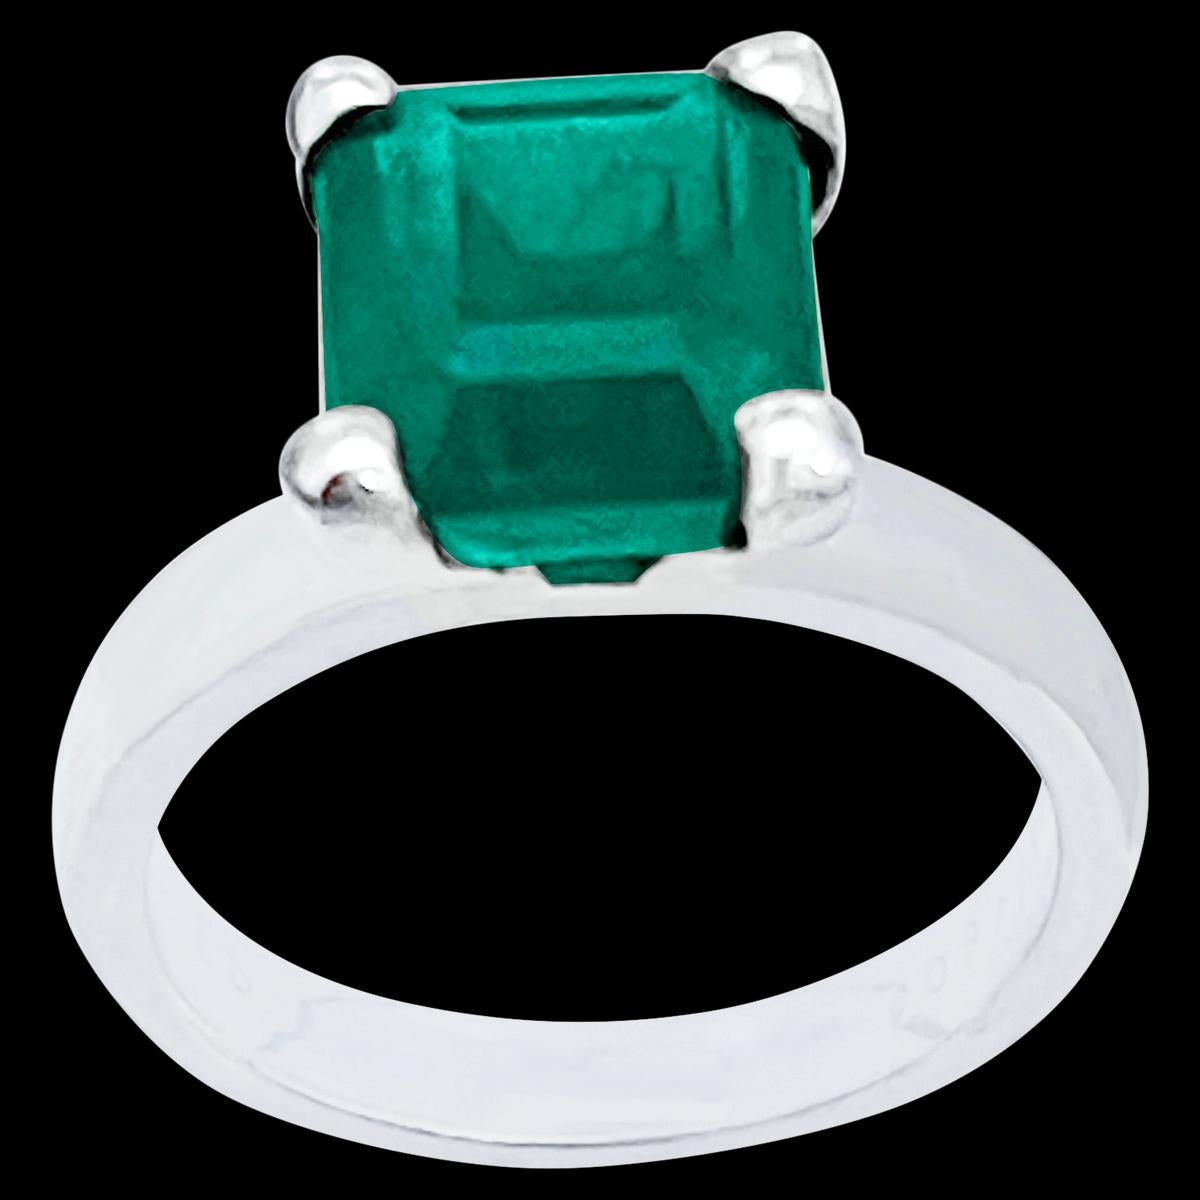 Approximately 3  Carat Natural Emerald Cut Emerald  Ring in Platinum Size 3.2
I am selling this ring at a very reasonable price.
Approximately  3  Carat Natural  Emerald cut emerald 
Intense green color,  Extremely Beautiful stone with shine and